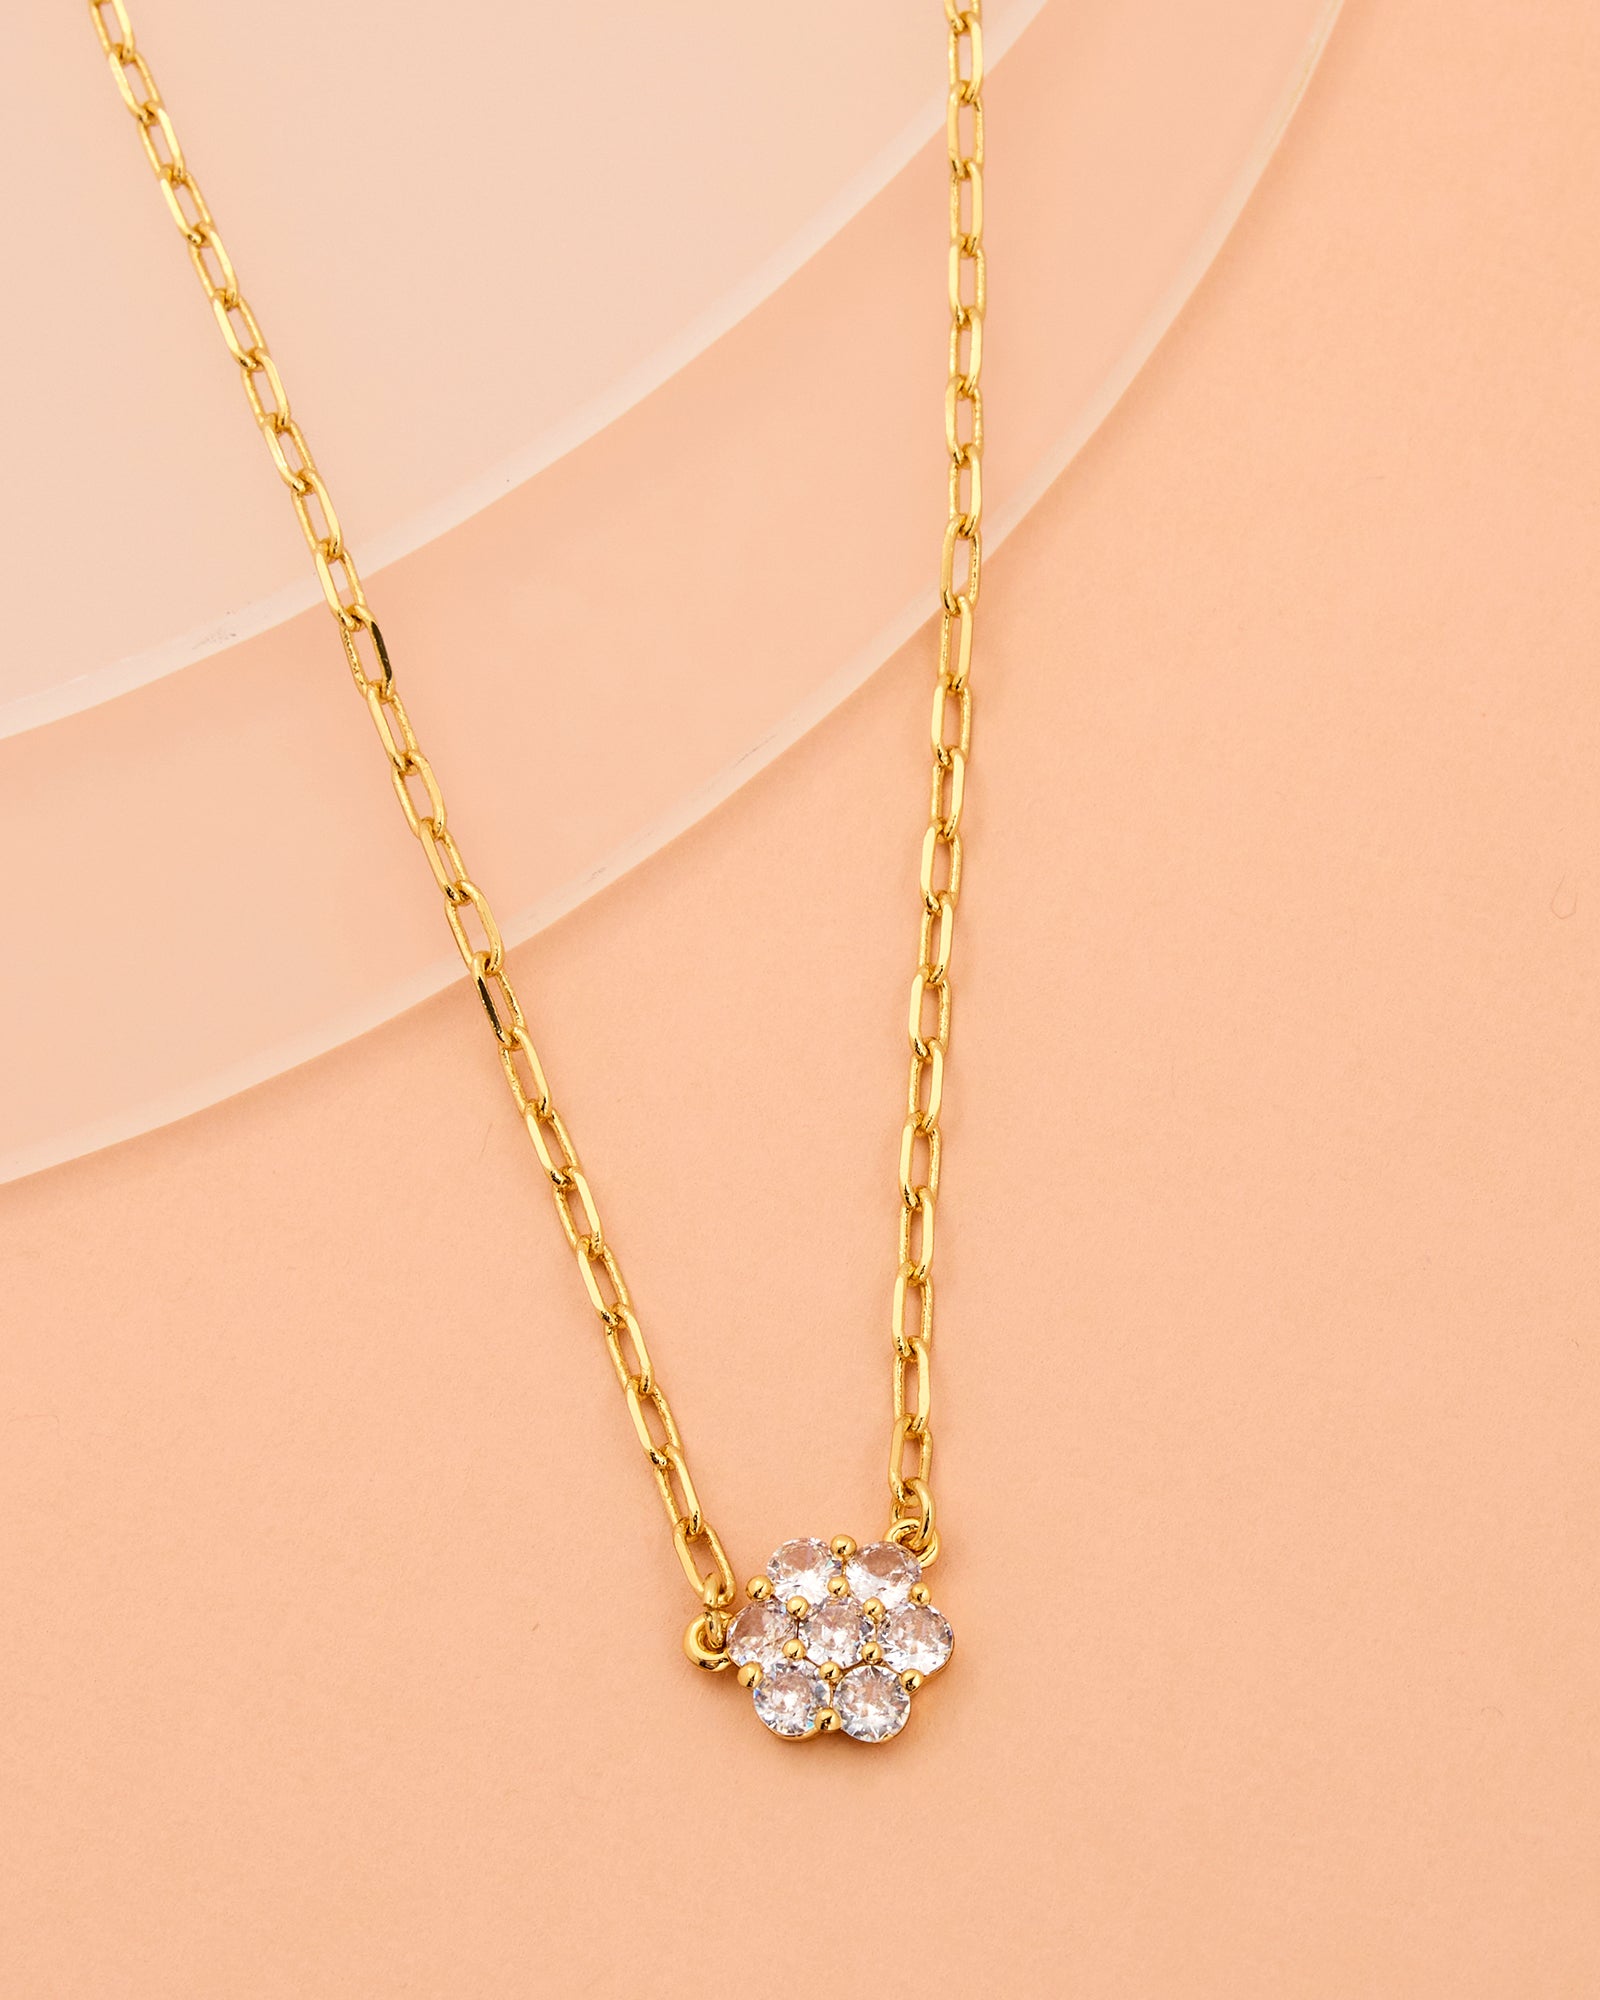 Gold chain necklace with gems in flower pattern